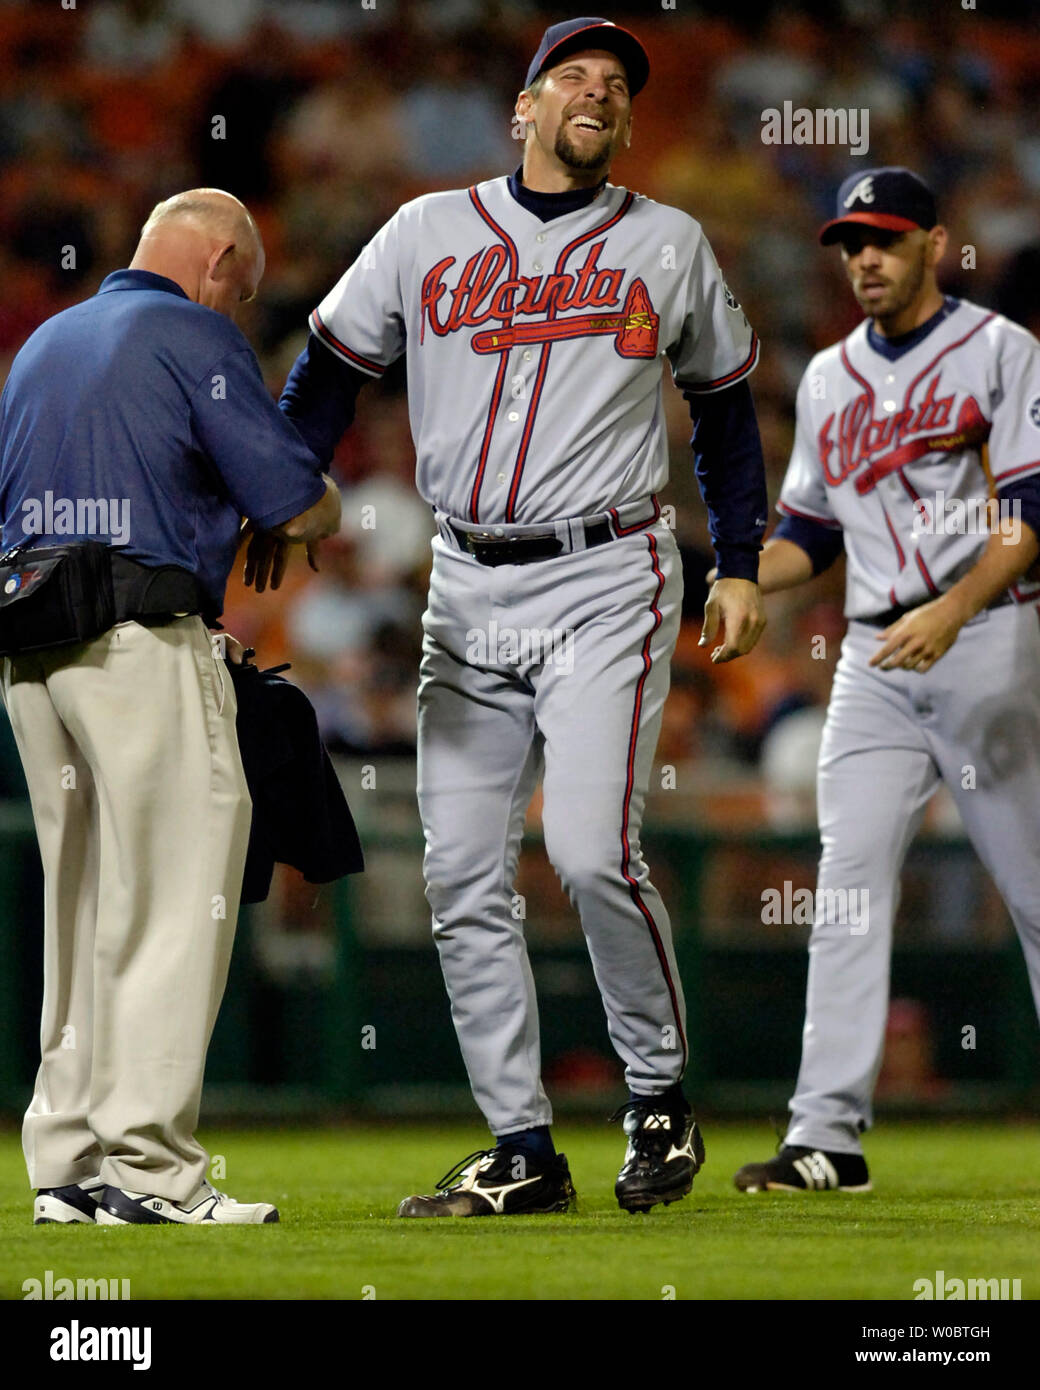 Atlanta Braves pitcher John Smoltz (C) reacts after dislocating his right pinky finger in the seventh inning against the Washington Nationals on May 14, 2007 at RFK Stadium in Washington.  The Nationals defeated the Braves 2-1 on Jason Bergmann's two-hitter.  (UPI Photo/Daniel Goldman) Stock Photo